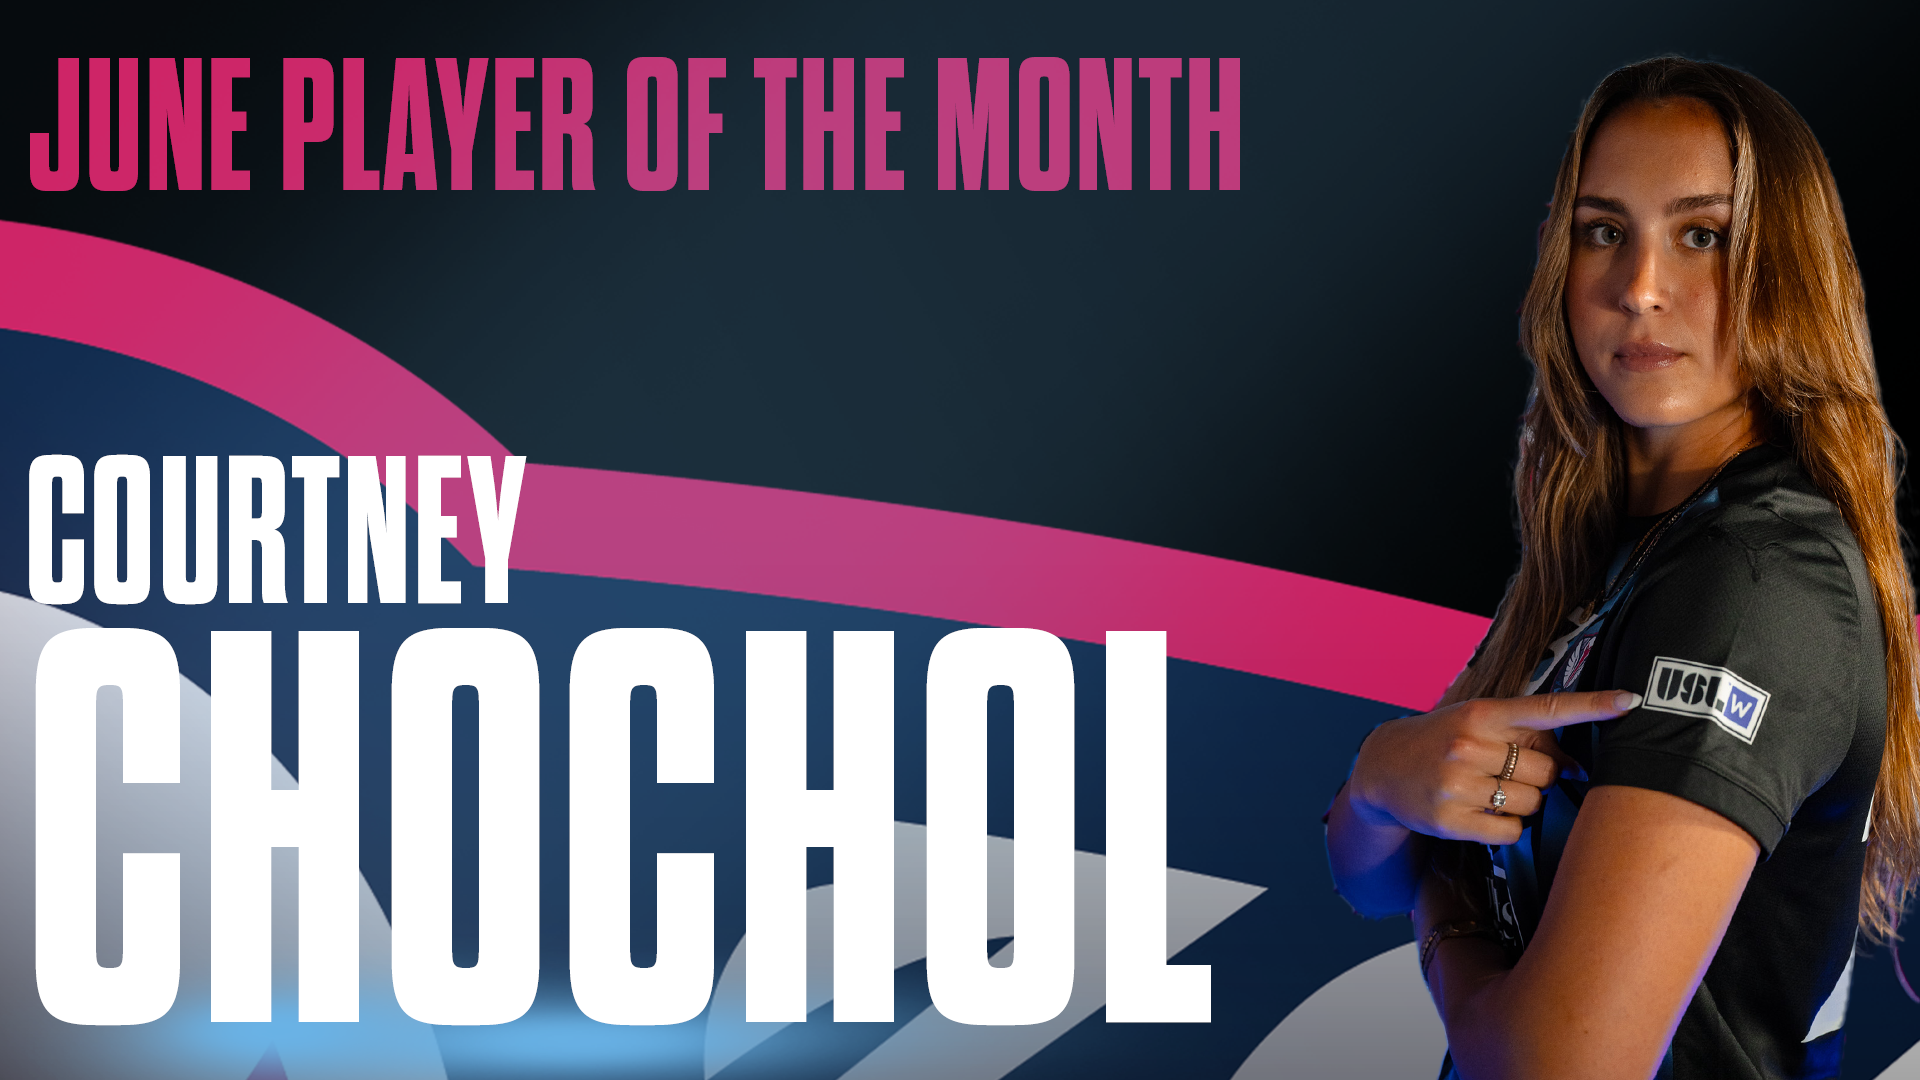 Courtney Chochol Named June Player of the Month featured image